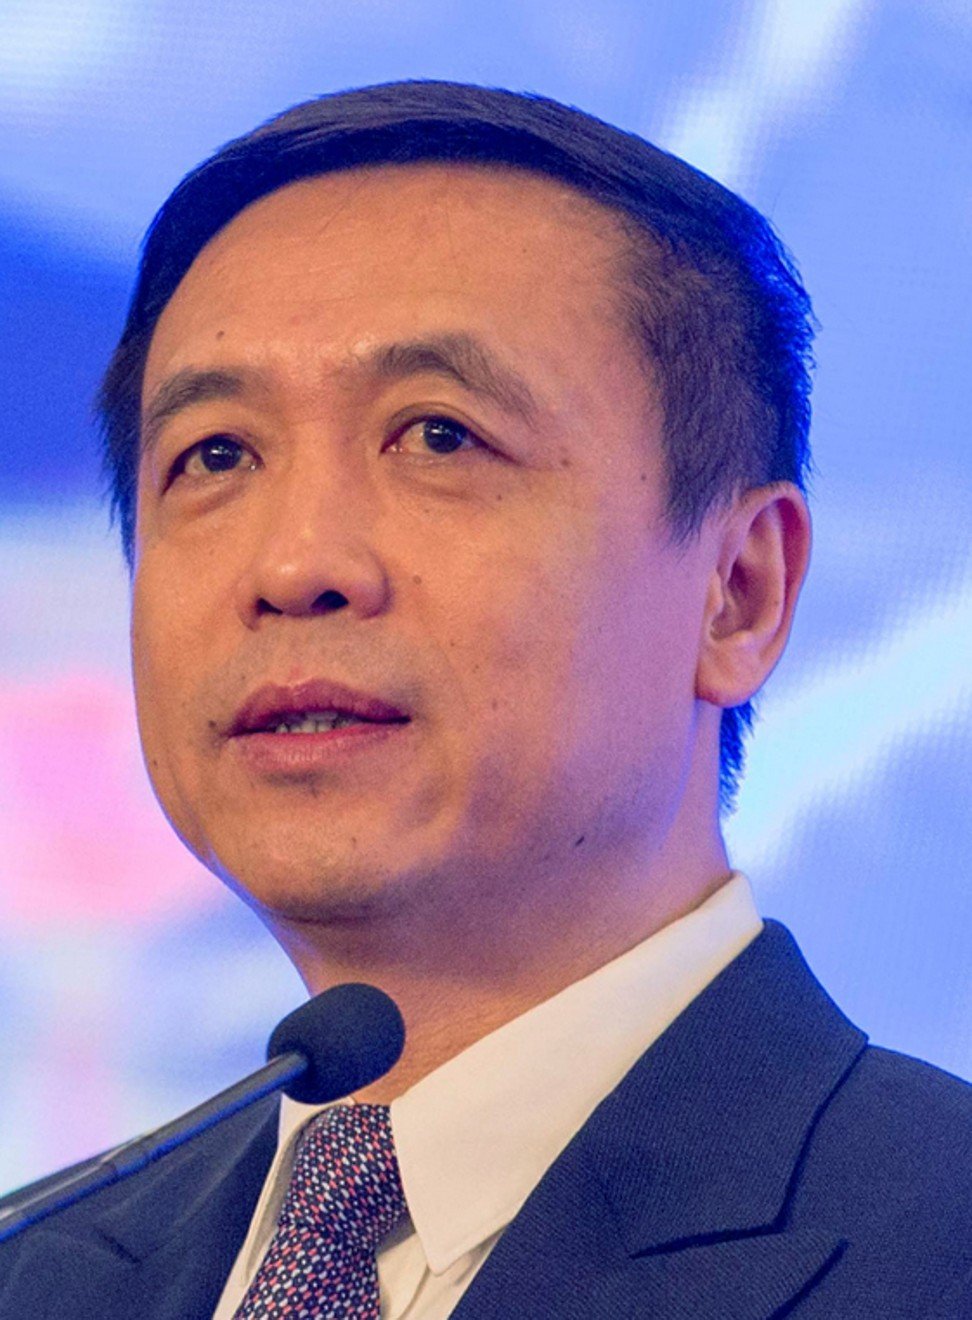 Zhang Hongsen, head of the film bureau of the State Administration of Press, Publication, Radio, Film and Television. Photo : HANDOUT